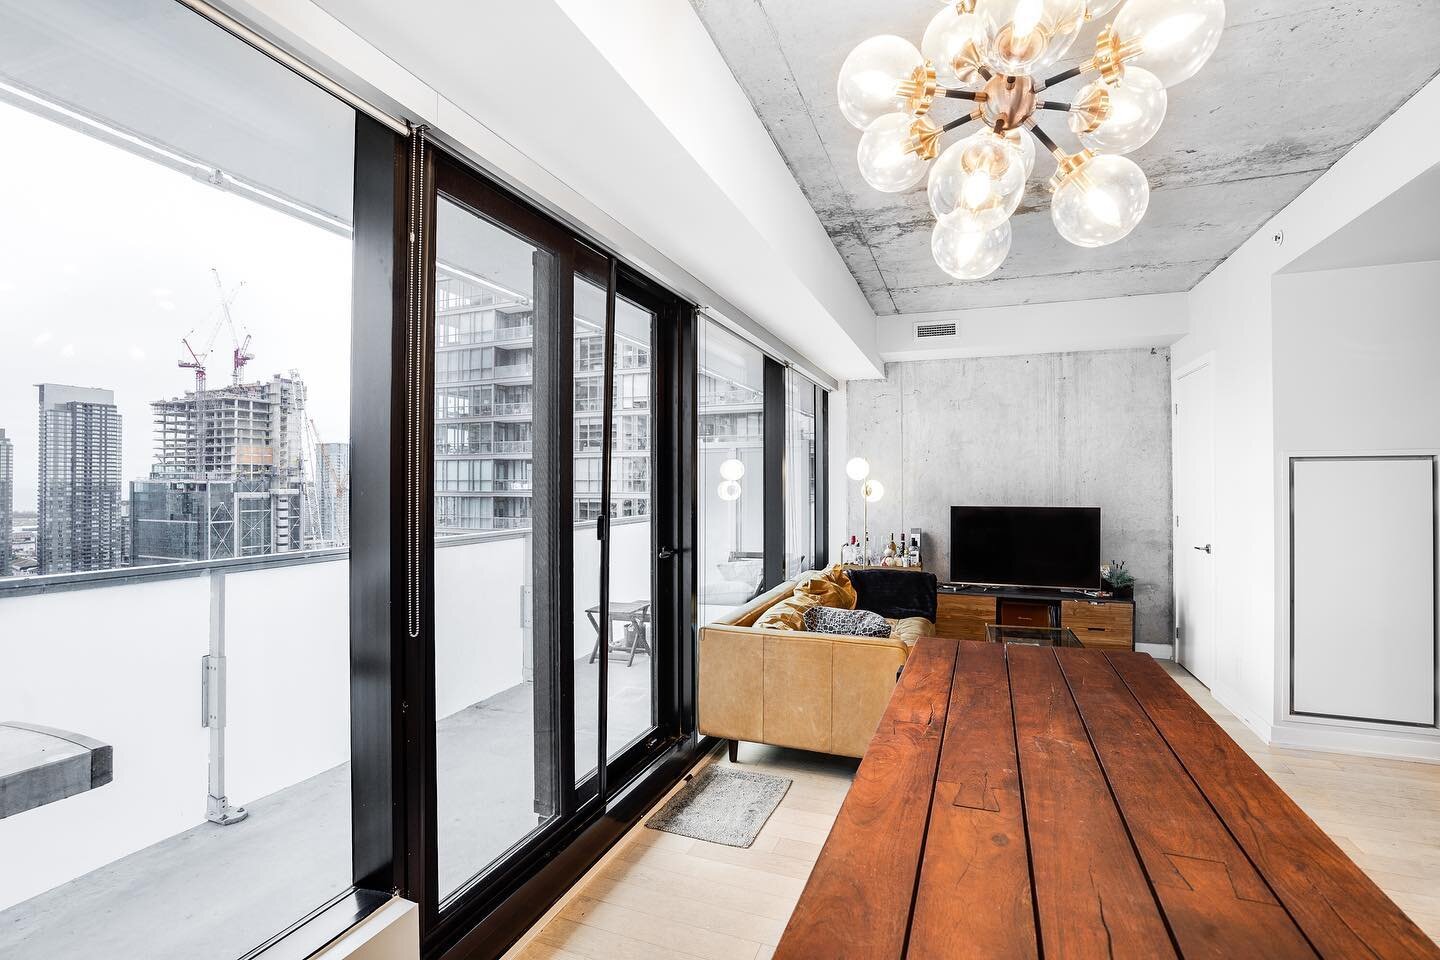 𝗡𝗘𝗪 𝗧𝗢 𝗠𝗔𝗥𝗞𝗘𝗧✨

KING CHARLOTTE CONDOS

All hail the king! It&rsquo;s easy to worship concrete 9-ft ceilings, wall-to-wall windows, a hard-to-find 172-sq.ft balcony with a bbq gas hook-up and unobstructed south views of the city. This light